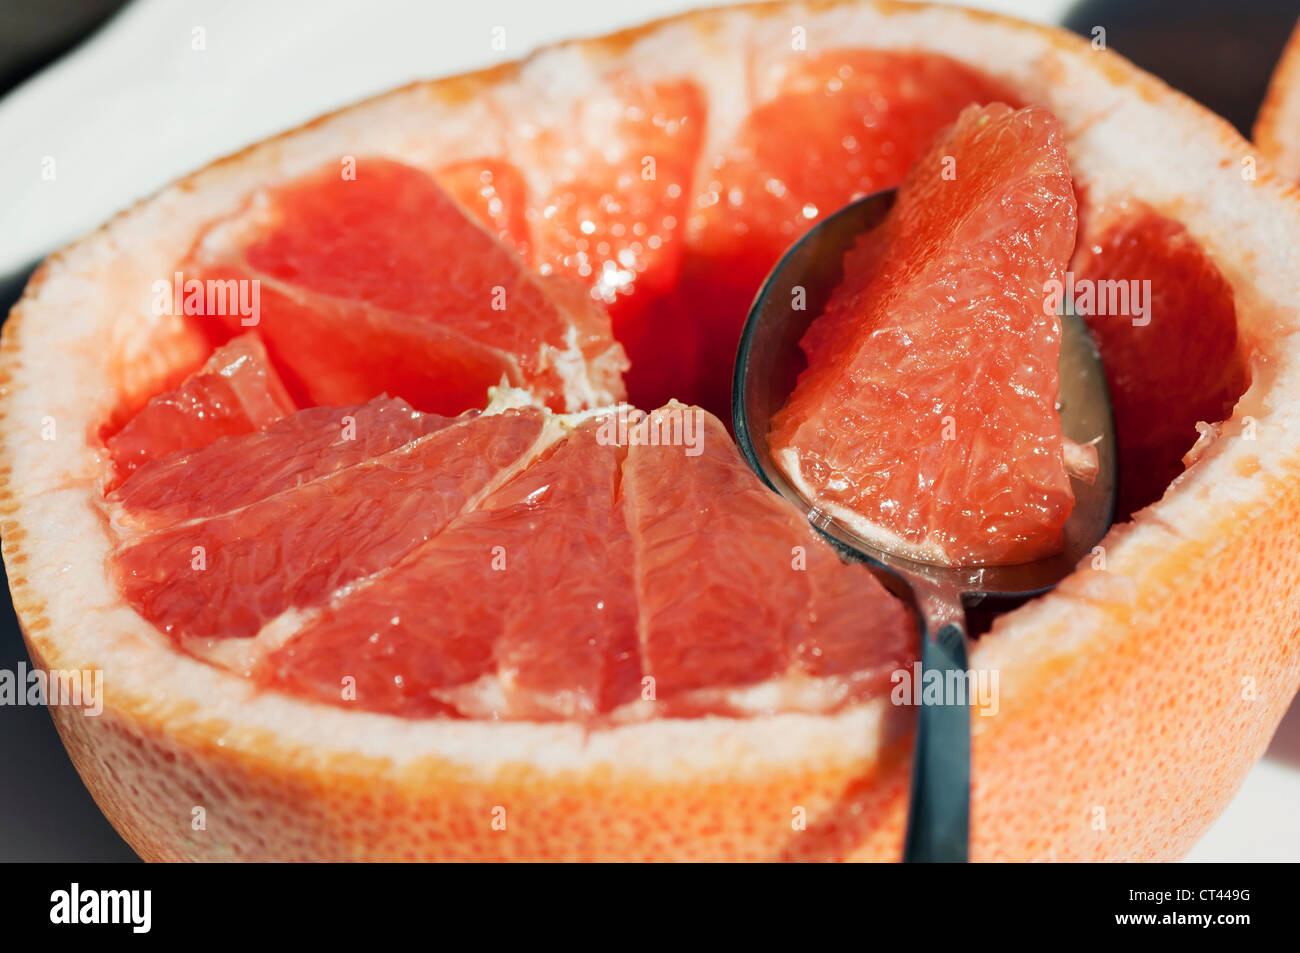 A spoon with a section of grapefruit rests on a cut grapefruit half. Stock Photo